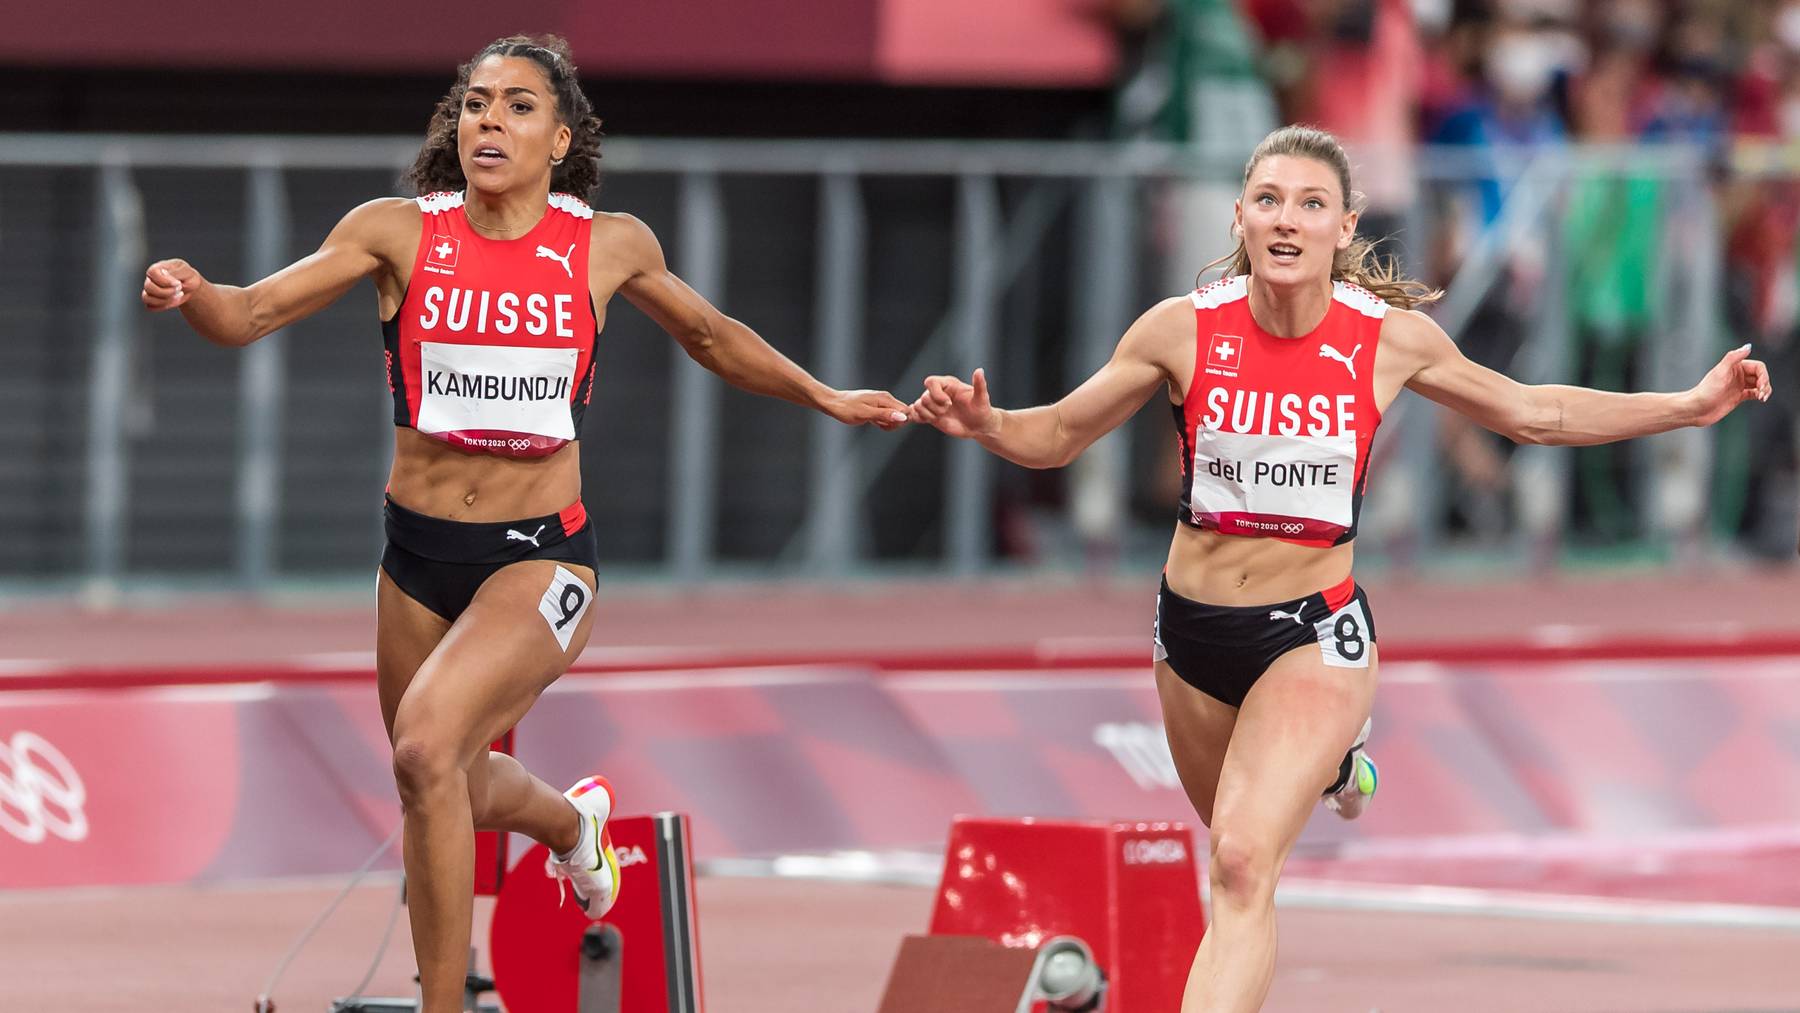 Ajla Del Ponte, right, and Mujinga Kambundji, left, finish the final of the women's 100 m in ranks five (Del Ponte) and six (Kambundji) at the 2020 Tokyo Summer Olympics Games in Tokyo, Japan, on Saturday, July 31, 2021.